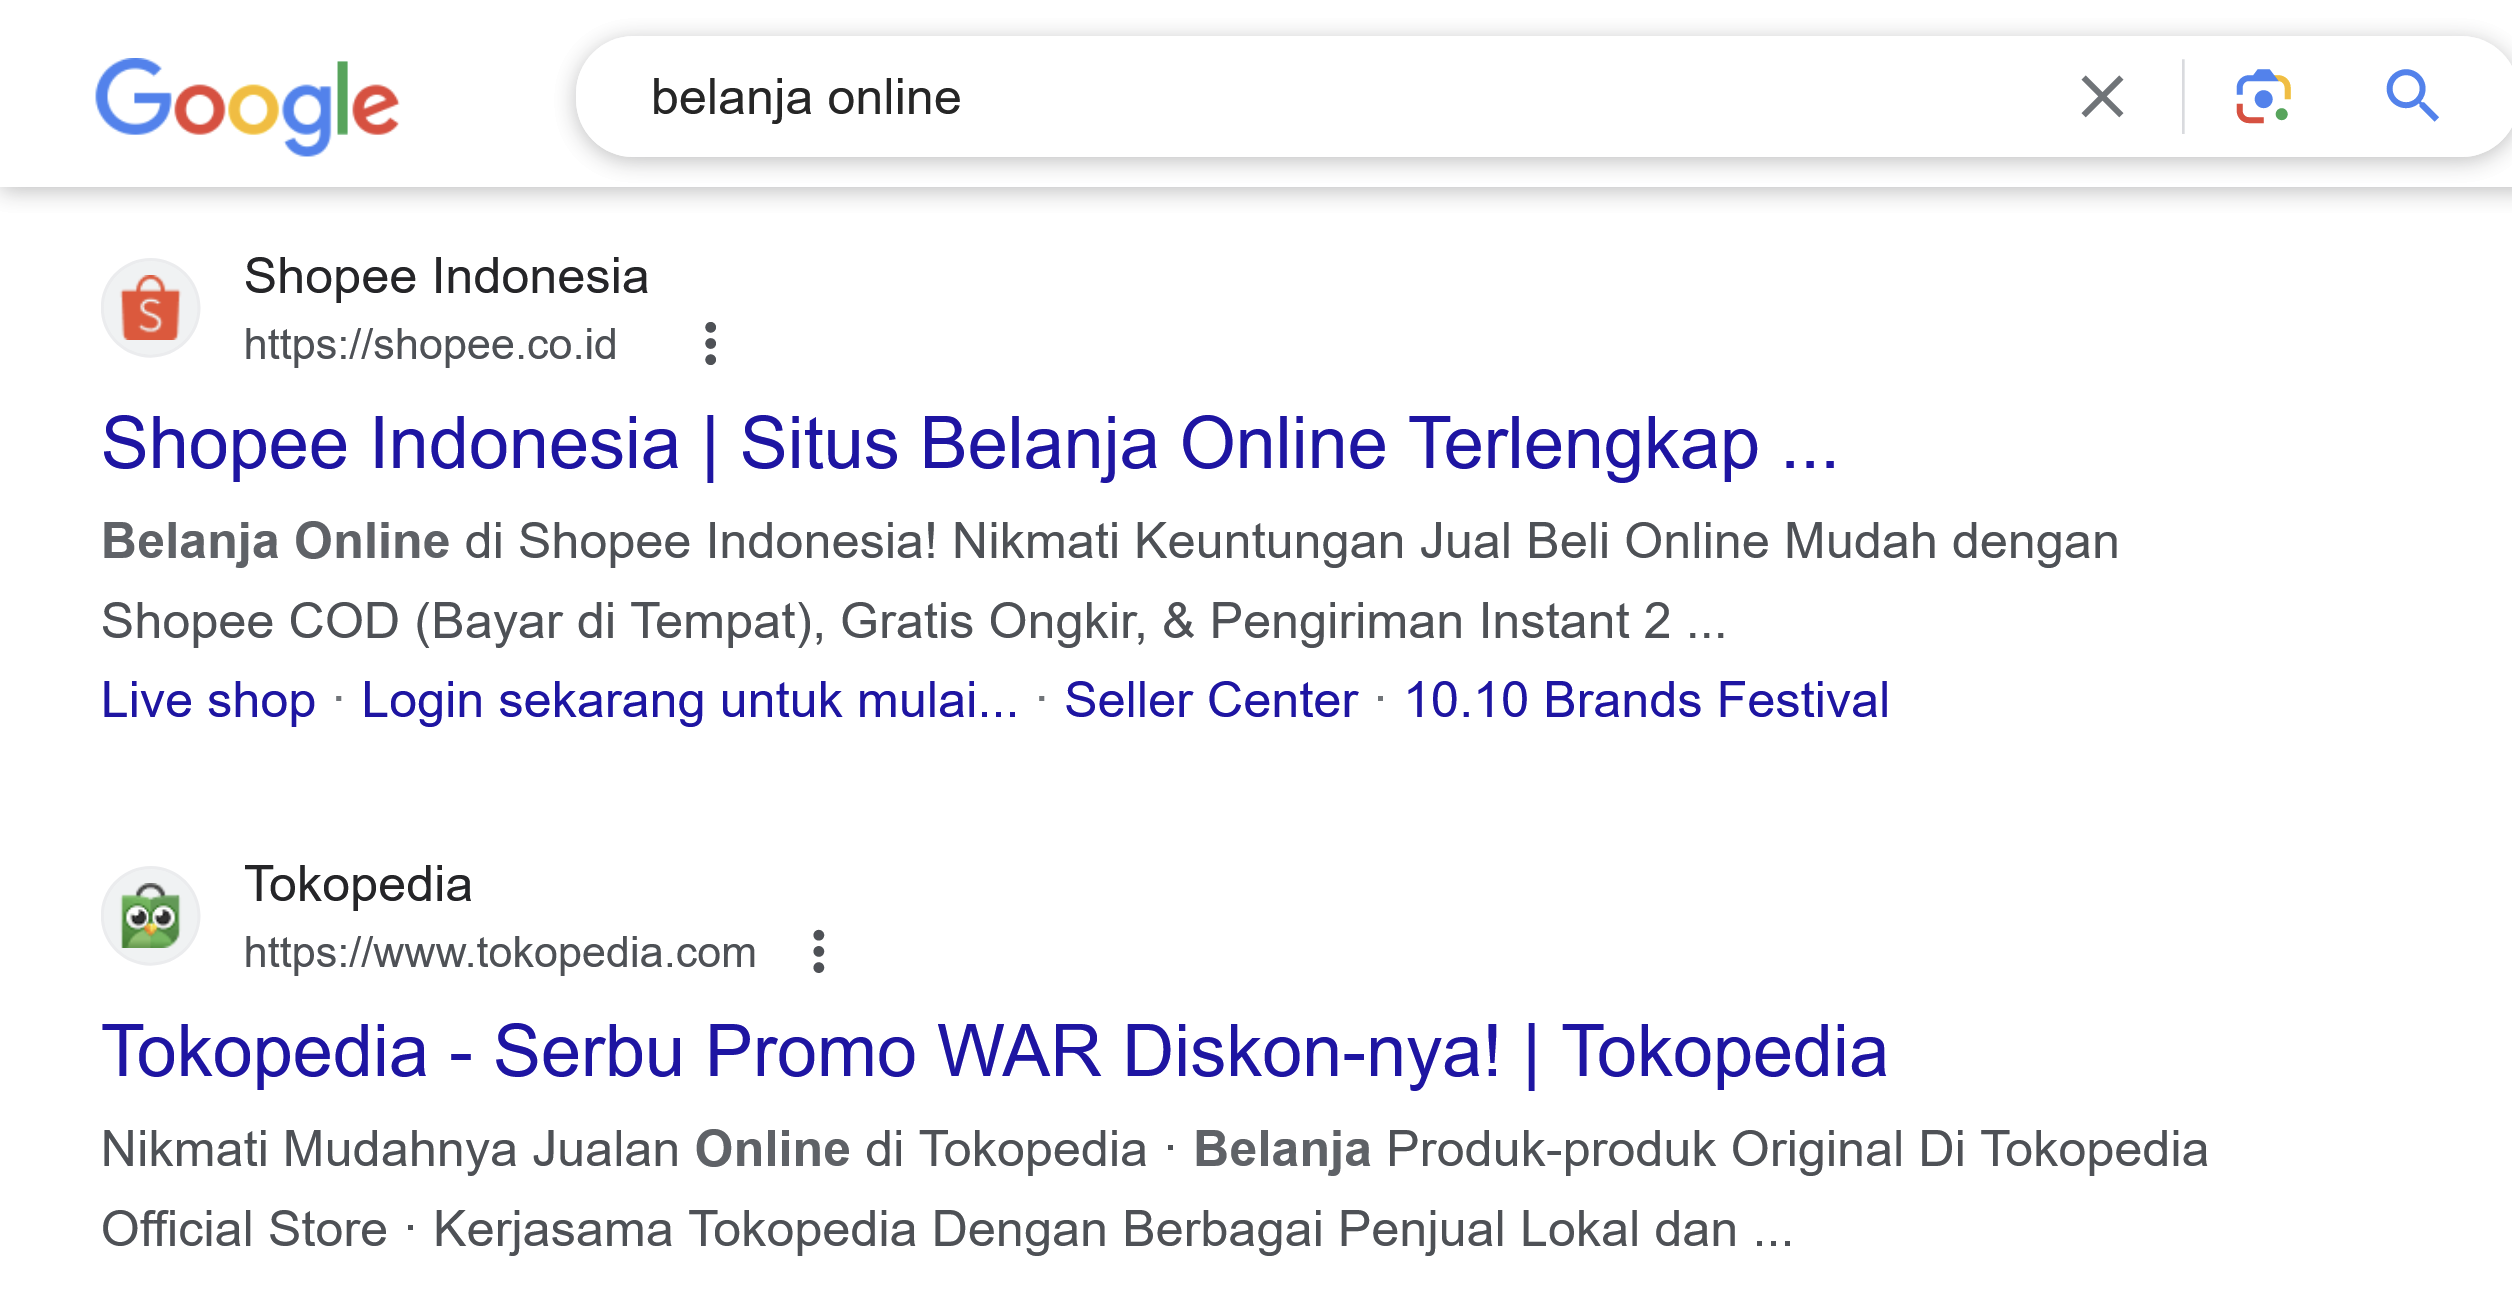 Why Speculating on Indonesian Domain Names Might Not Pay Off